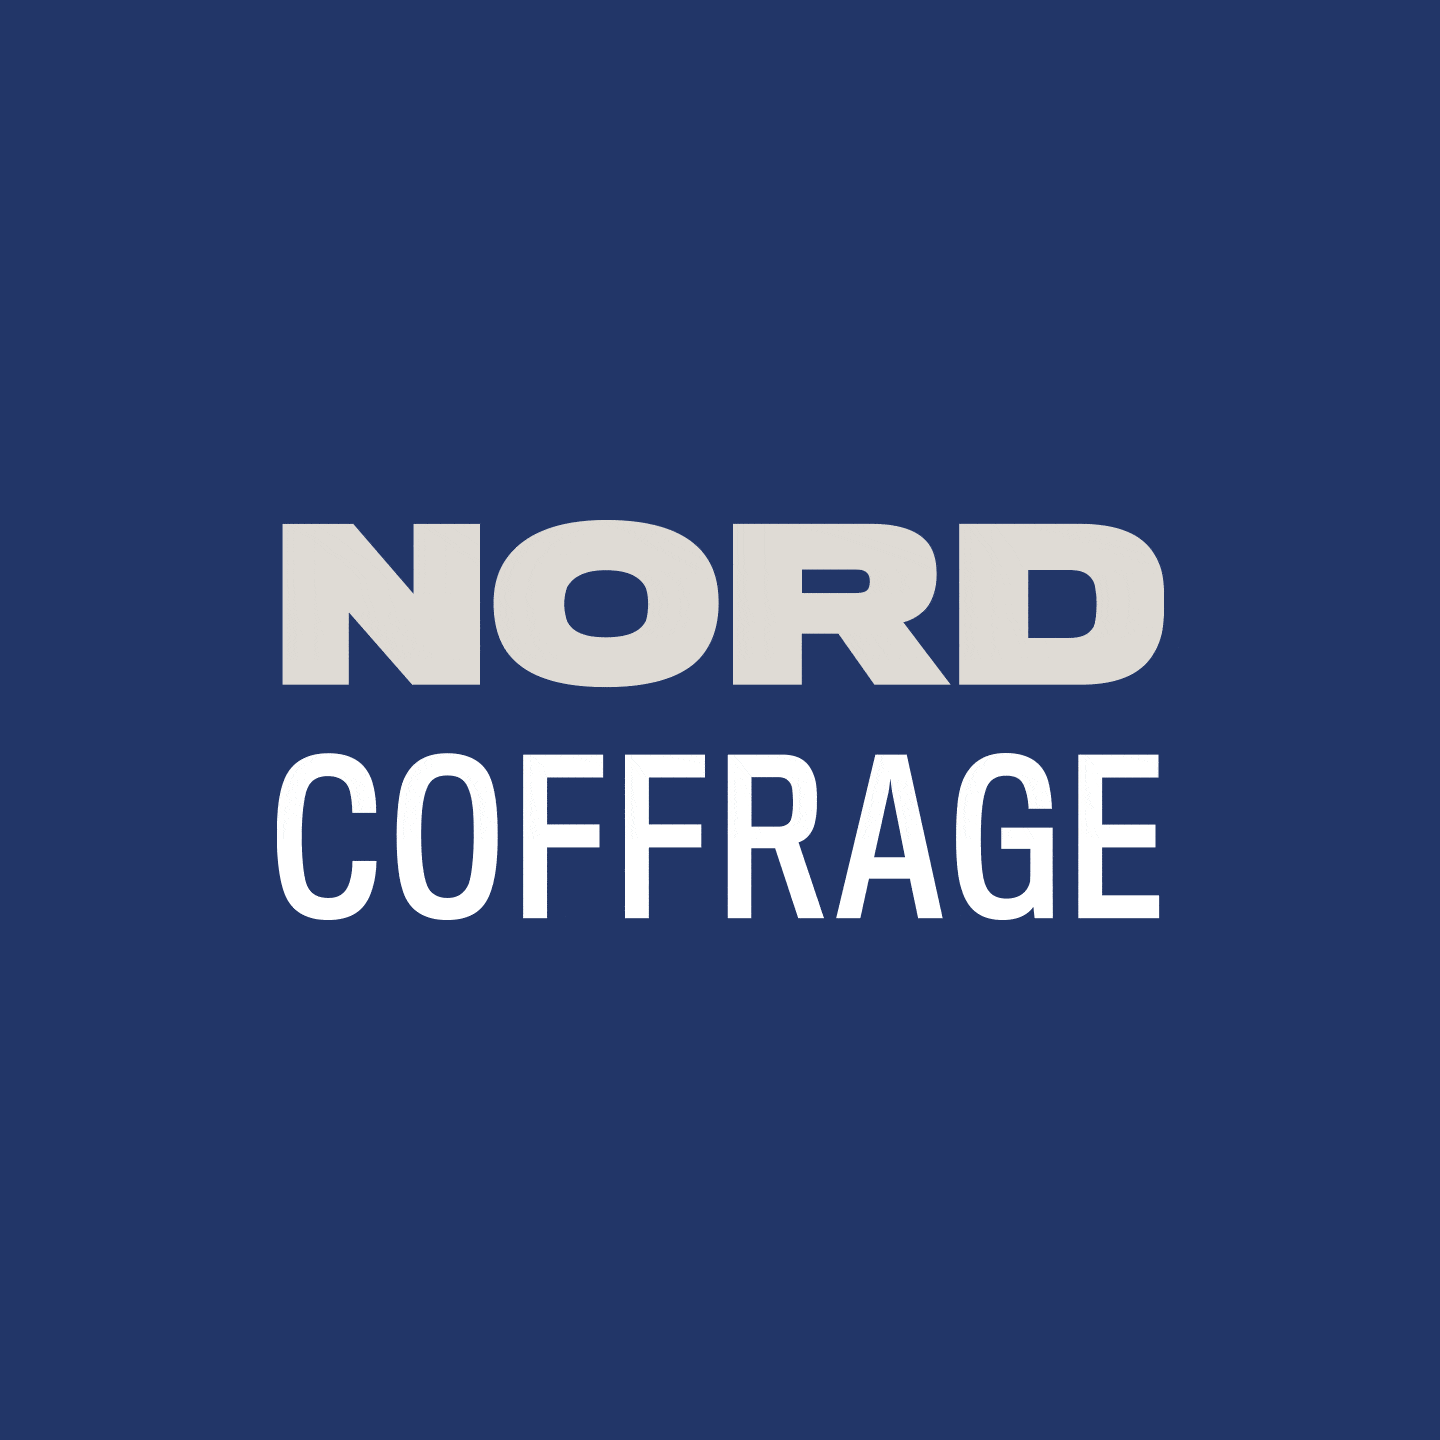 Nord Coffrage